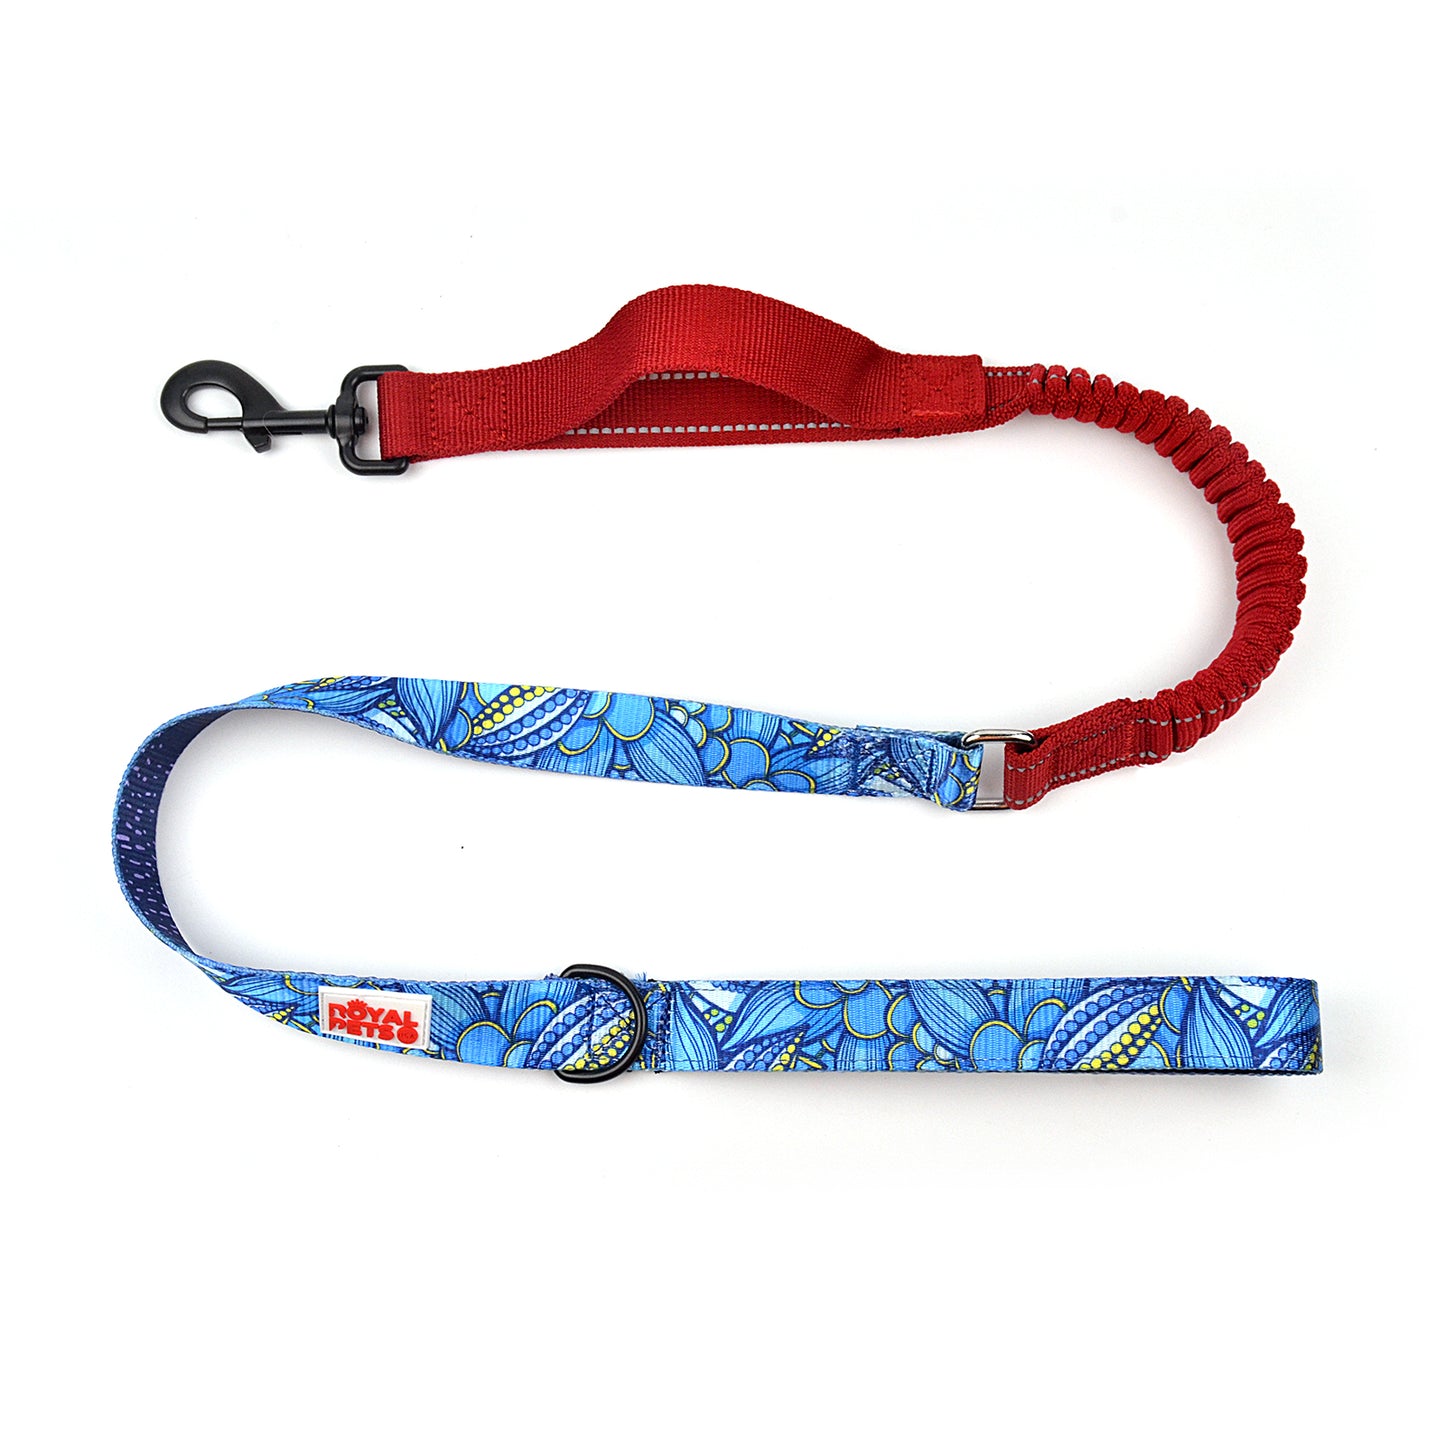 Royal Pets Printed Bungee Rope Leashes